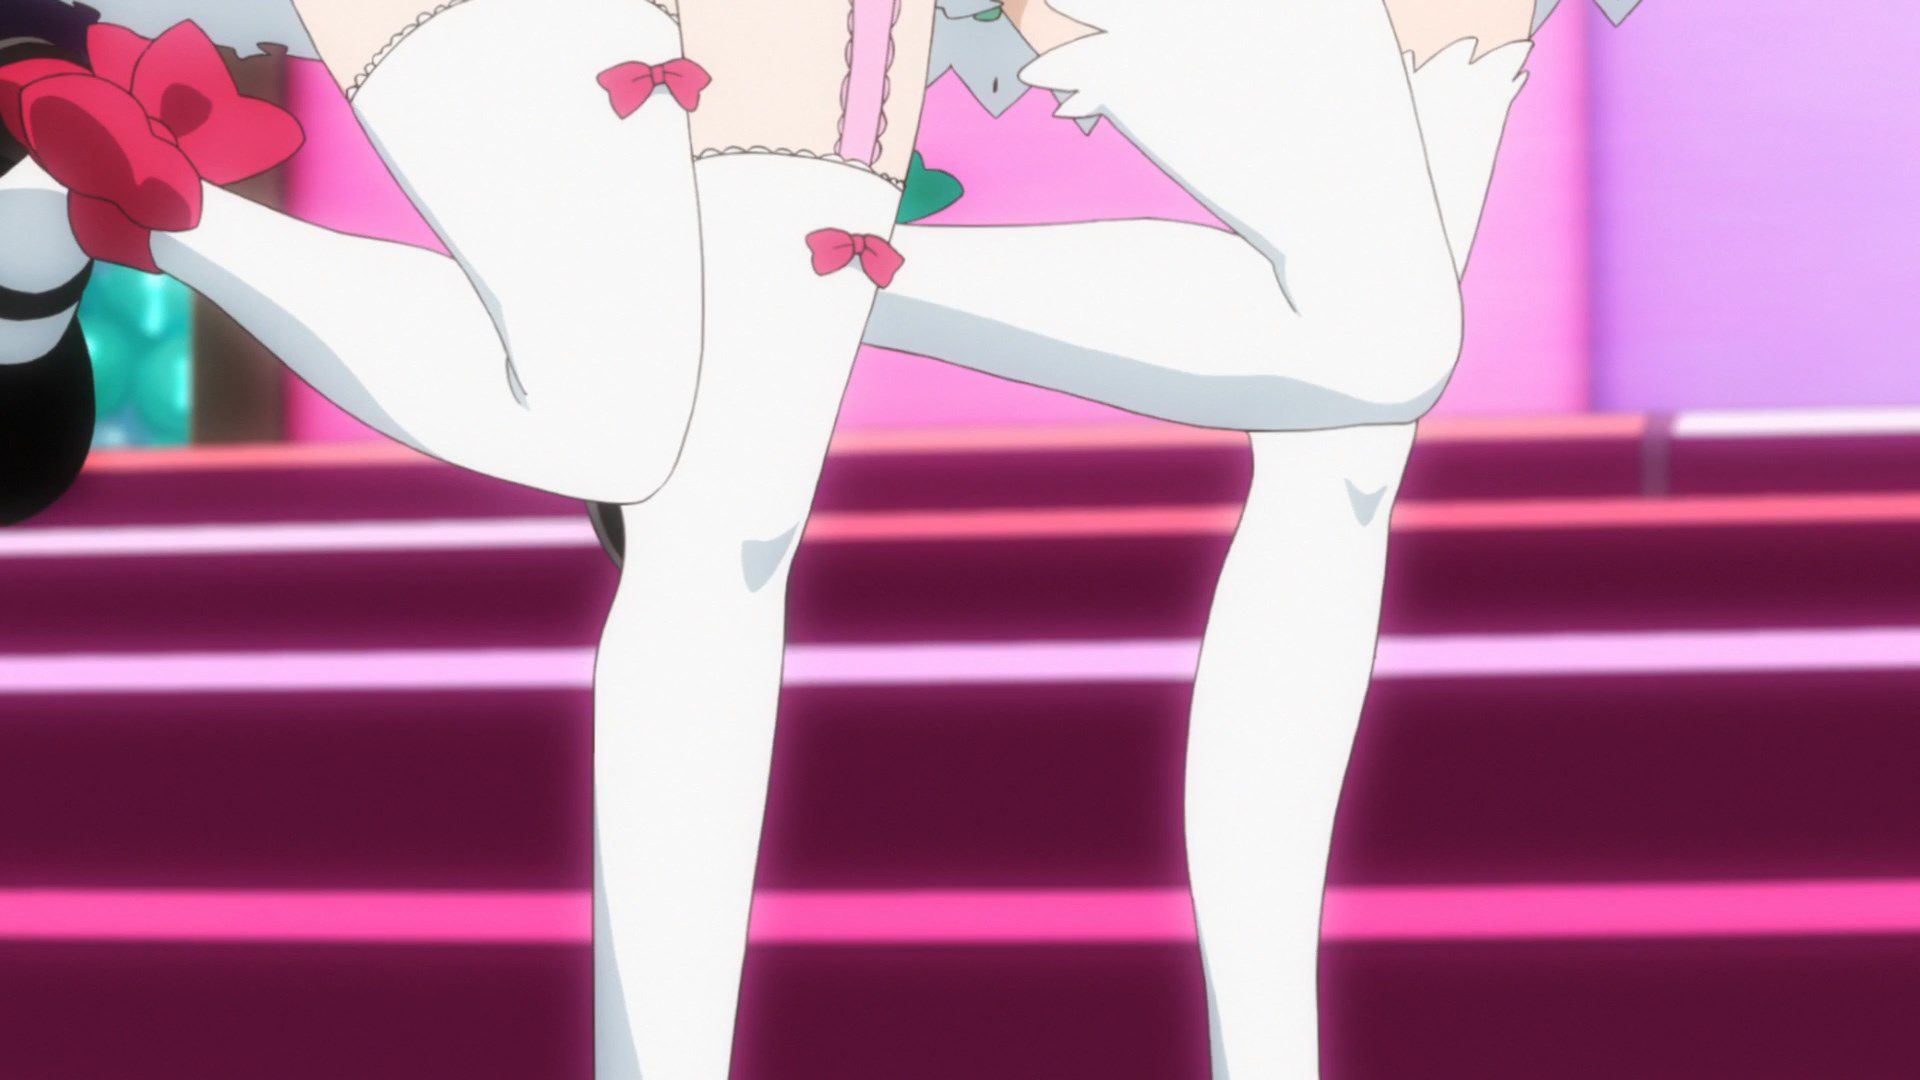 [God images] "love live! ' Μm ' PV's leg is too erotic everyone wakes up to a leg fetish of wwwww 15